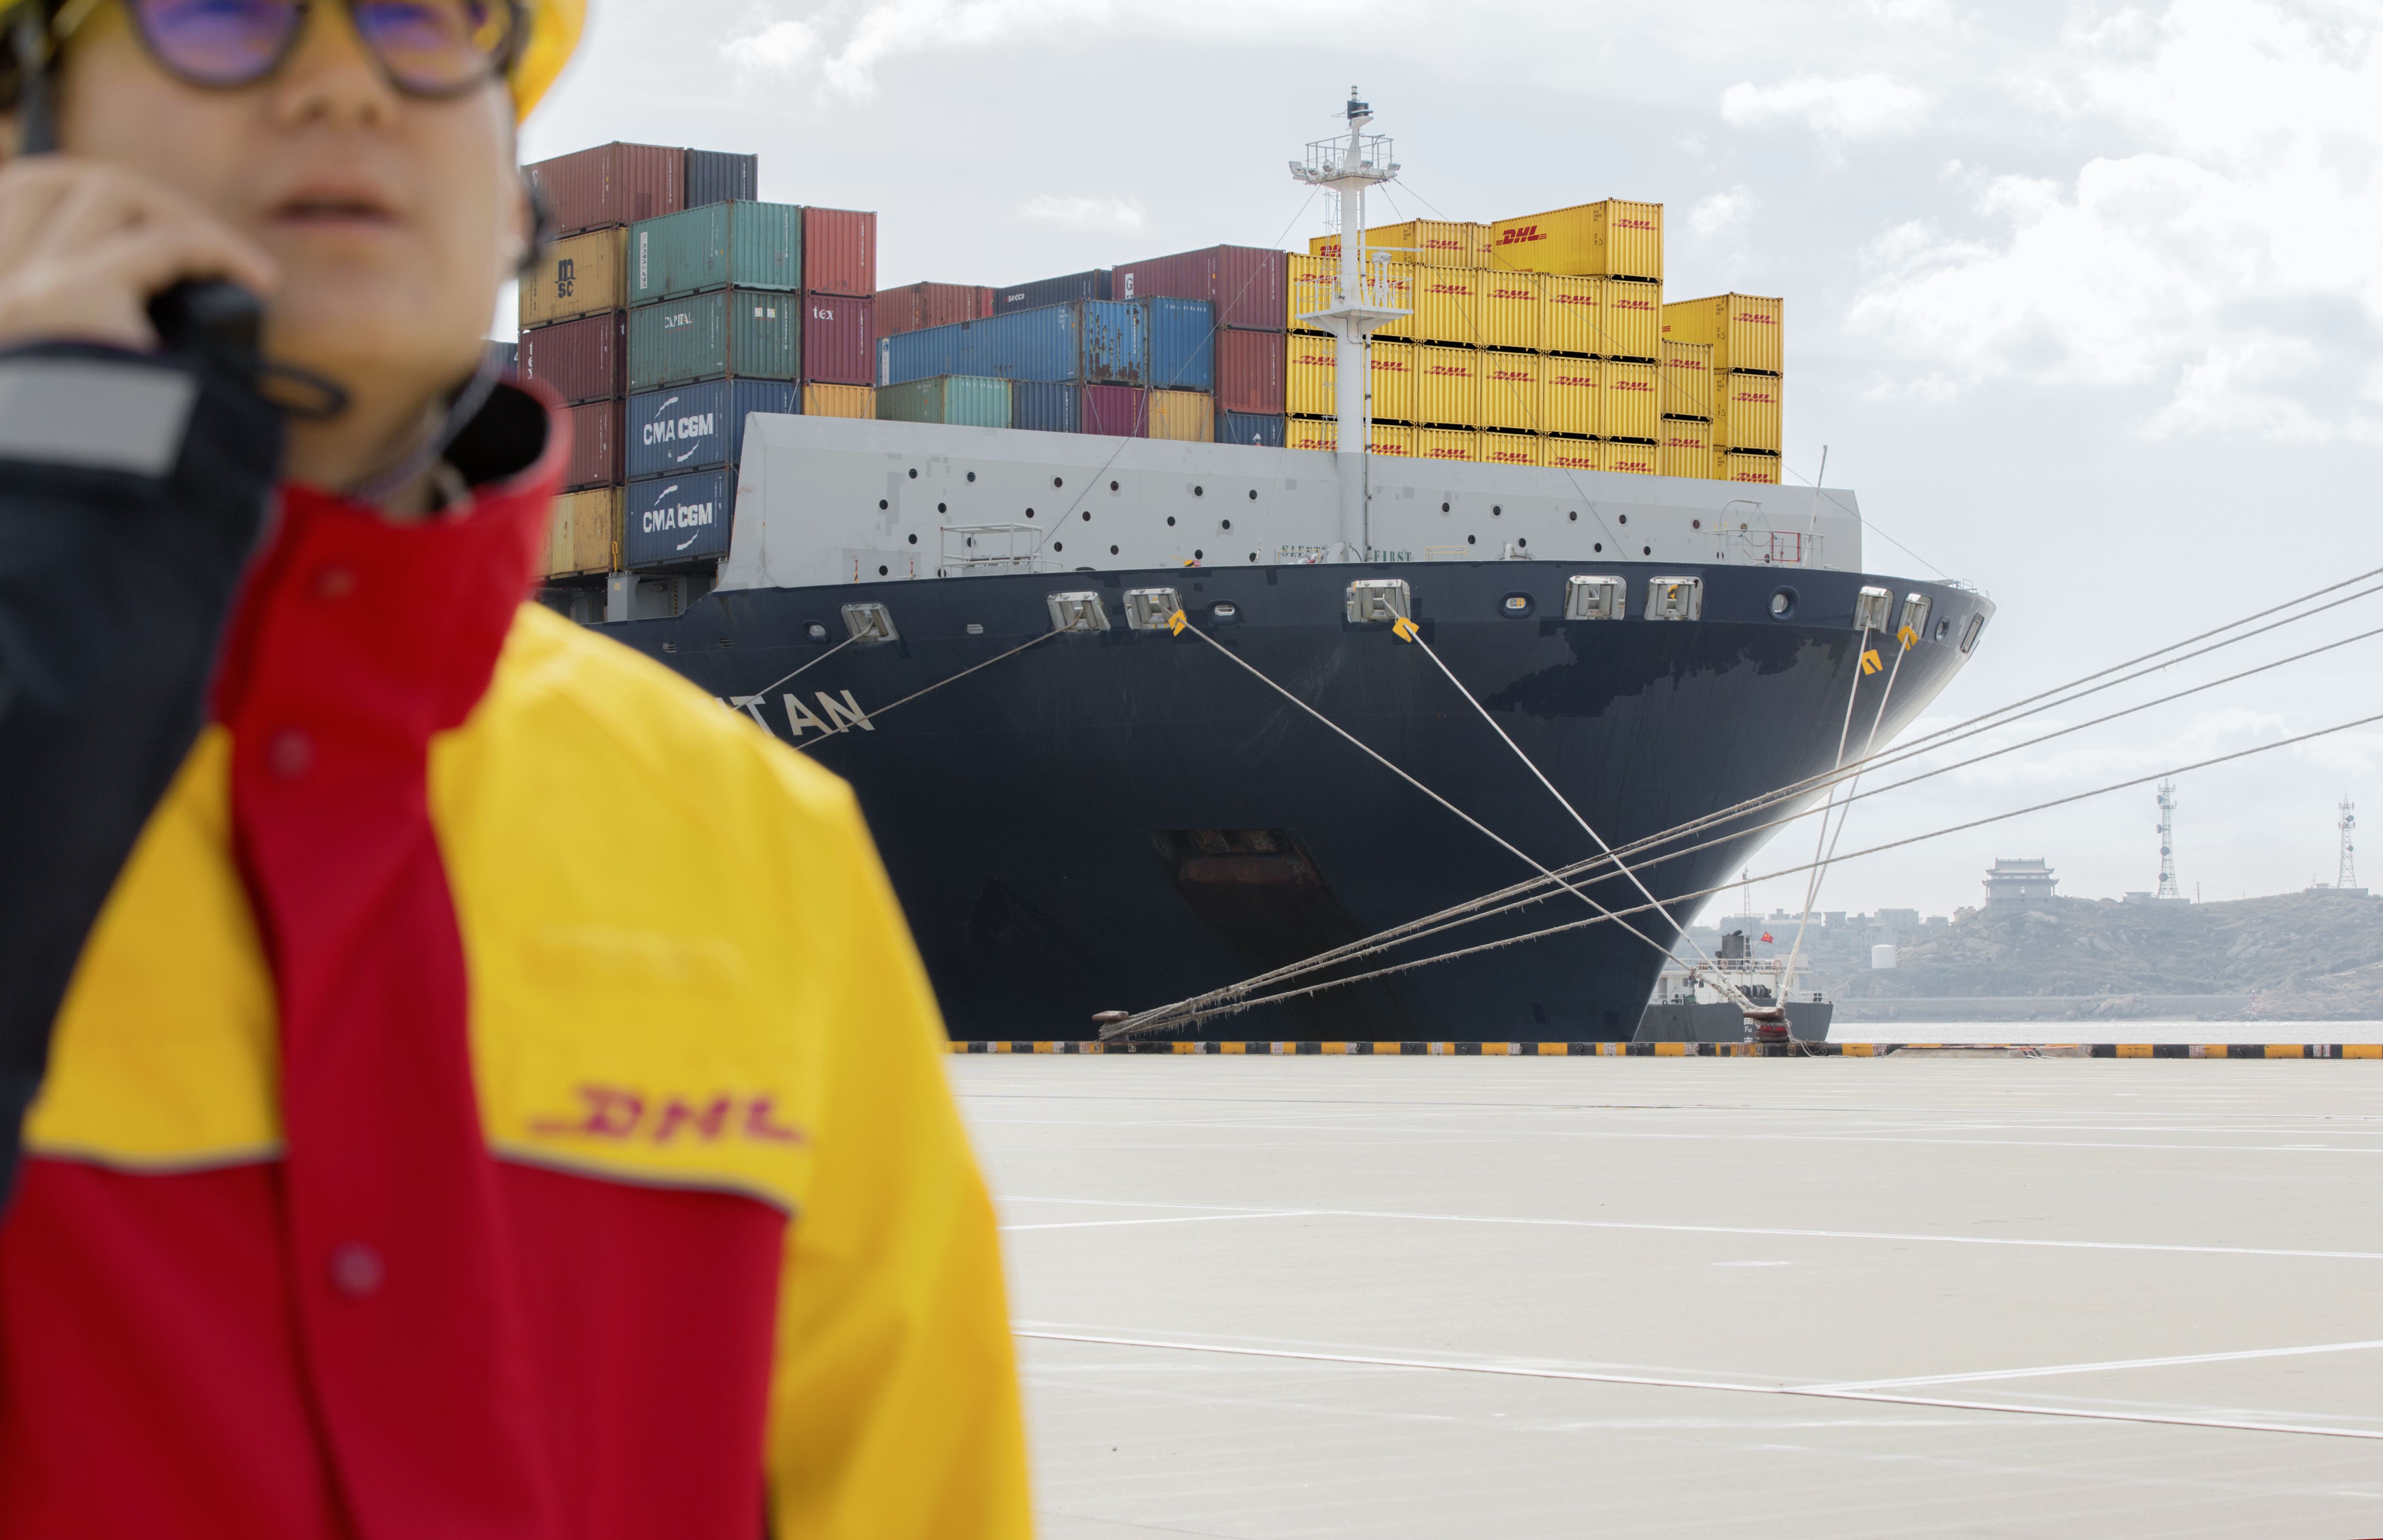 DHL provides more transparency at high seas